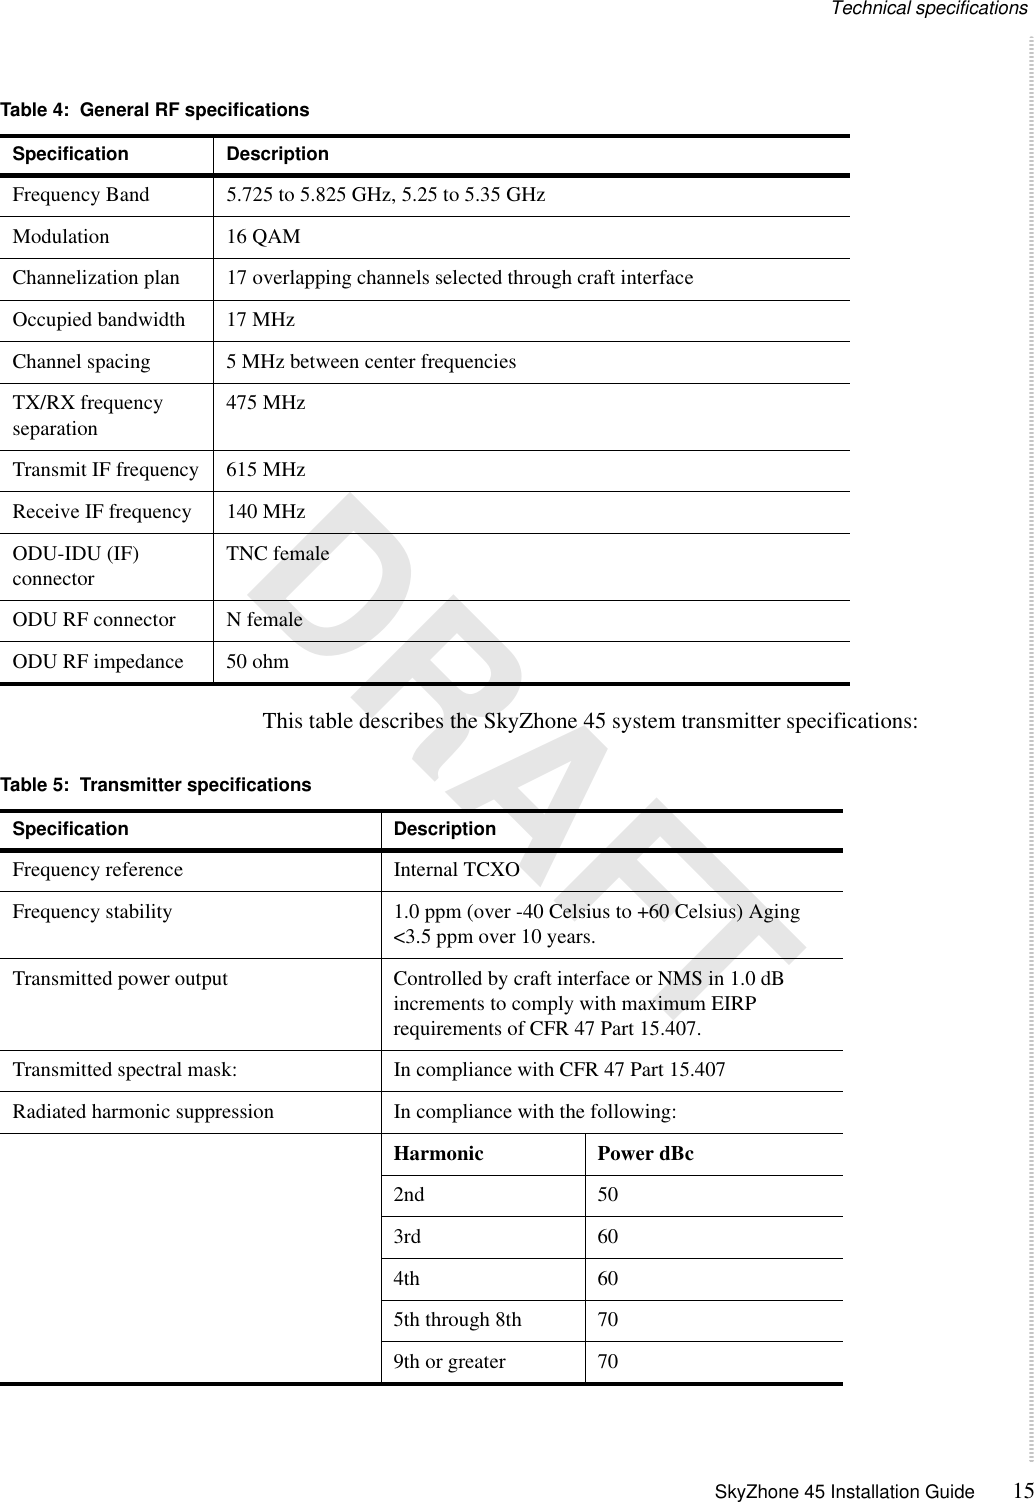 Technical specifications SkyZhone 45 Installation Guide 15 DRAFTThis table describes the SkyZhone 45 system transmitter specifications:Table 4:  General RF specificationsSpecification DescriptionFrequency Band 5.725 to 5.825 GHz, 5.25 to 5.35 GHzModulation 16 QAMChannelization plan 17 overlapping channels selected through craft interfaceOccupied bandwidth 17 MHzChannel spacing 5 MHz between center frequenciesTX/RX frequency separation475 MHzTransmit IF frequency 615 MHzReceive IF frequency 140 MHzODU-IDU (IF) connector TNC femaleODU RF connector N femaleODU RF impedance  50 ohmTable 5:  Transmitter specificationsSpecification DescriptionFrequency reference Internal TCXOFrequency stability 1.0 ppm (over -40 Celsius to +60 Celsius) Aging &lt;3.5 ppm over 10 years.Transmitted power output Controlled by craft interface or NMS in 1.0 dB increments to comply with maximum EIRP requirements of CFR 47 Part 15.407. Transmitted spectral mask: In compliance with CFR 47 Part 15.407Radiated harmonic suppression In compliance with the following:Harmonic Power dBc2nd 503rd 604th 605th through 8th 709th or greater 70